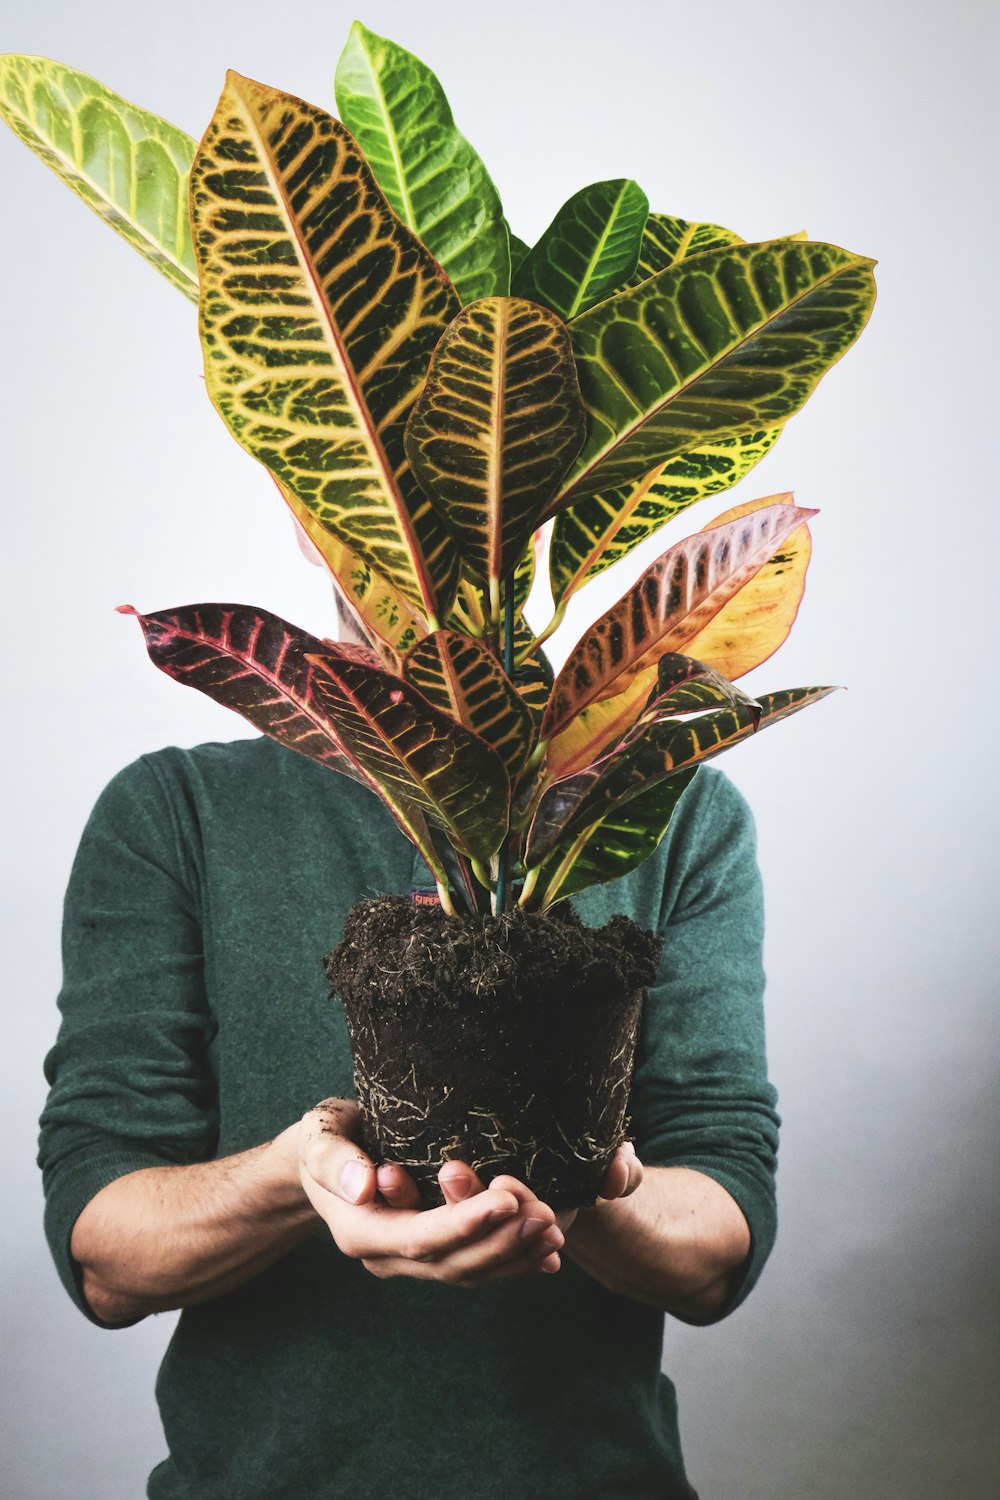 person holding green potted plant